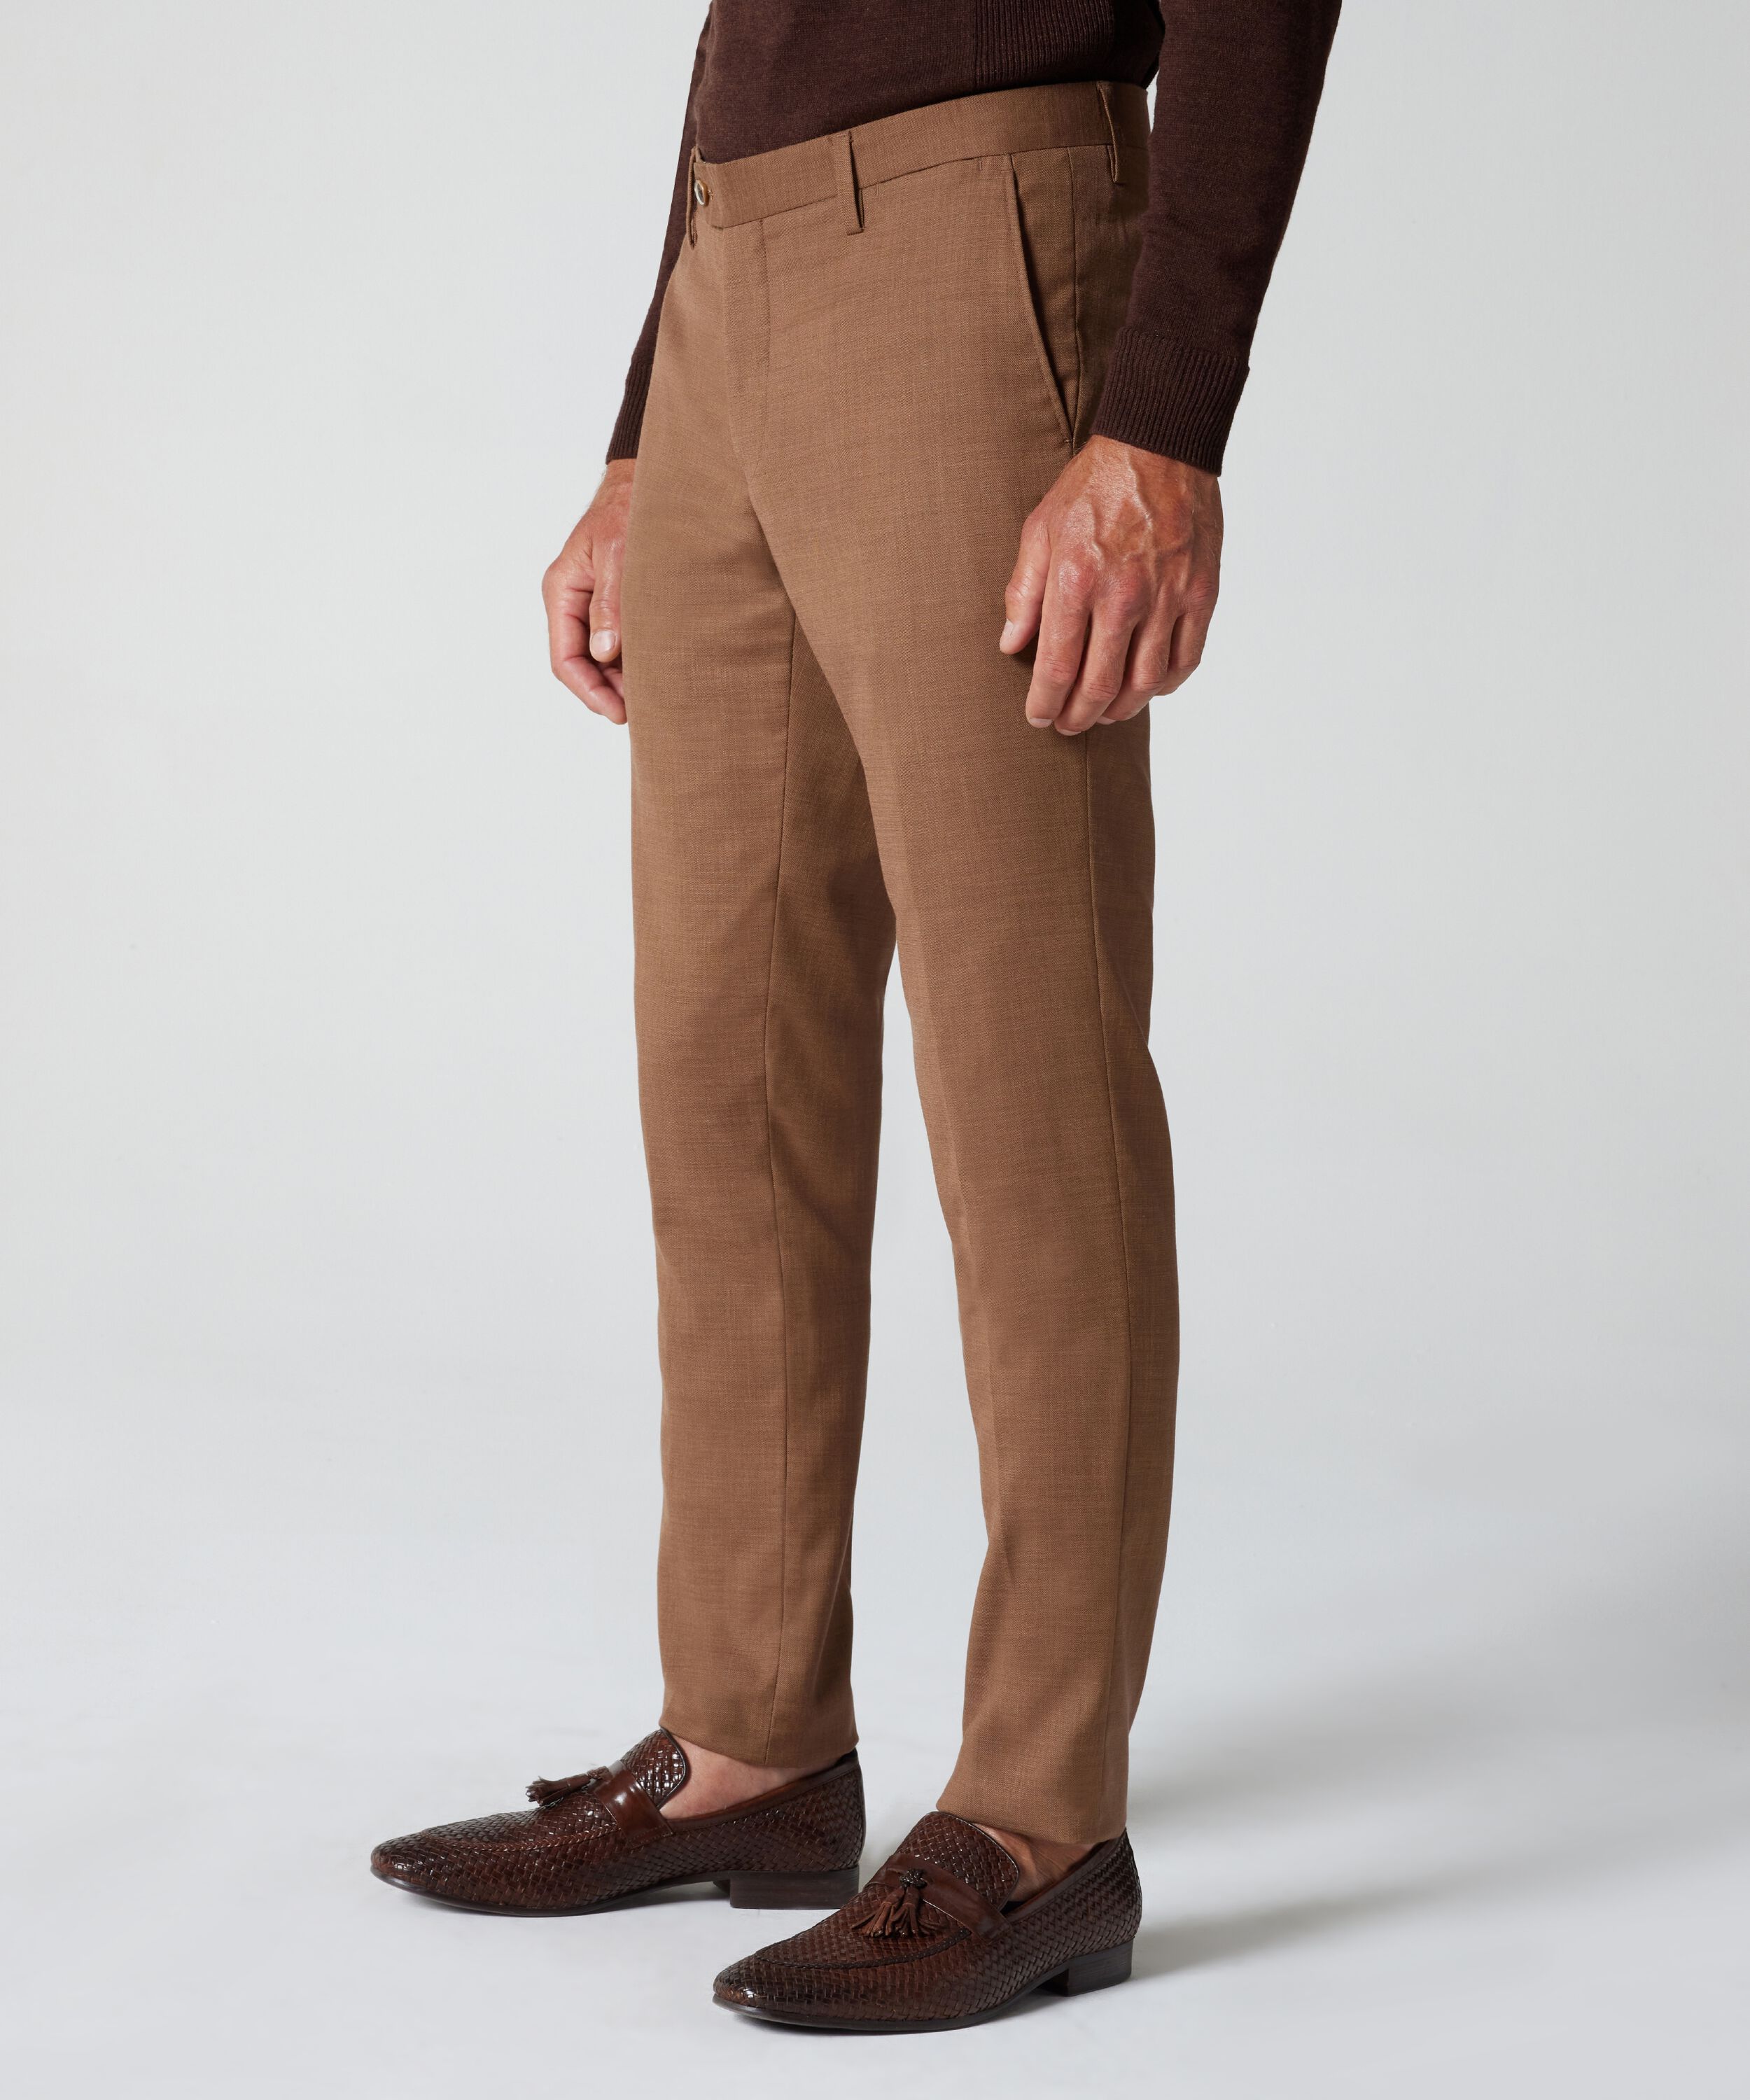 Ultra Slim Stretch Two Tone Tailored Pant - Toffee, Suit Pants